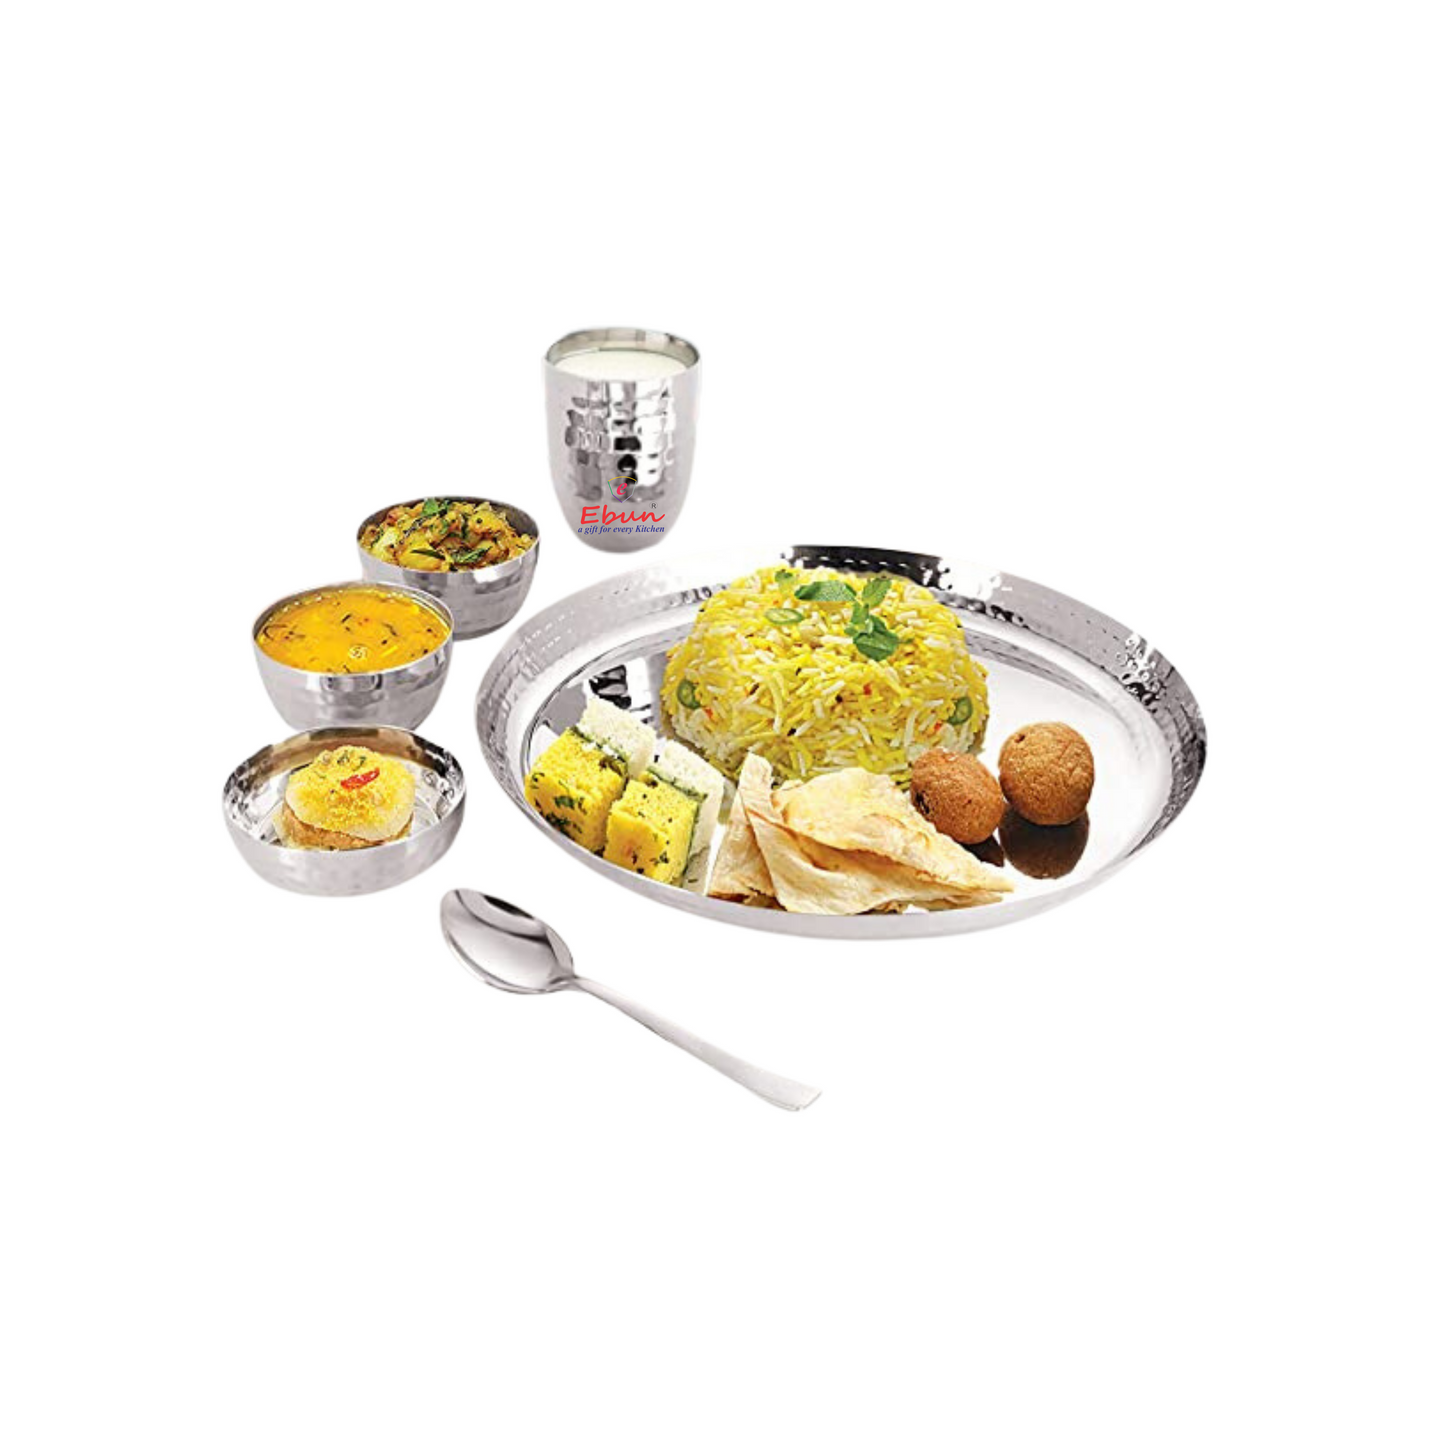 steel dinner set for kitchen 101 pieces | steel plates set of 4 | steel plates for kids | dinner set steel 151 pieces | lunch plates stainless steel | steel plates set of 2 | stainless steel plates | steel plate set | steel name plates for home | steel plates set of 6 dinner plate | steel plates set of 6 dinner plate | steel thali with compartments | vinod stainless steel dinner set | plates steel | steel plates for lunch | steel dinner set of 6 | small steel plates | bhojan thali steel 6 big size deep 